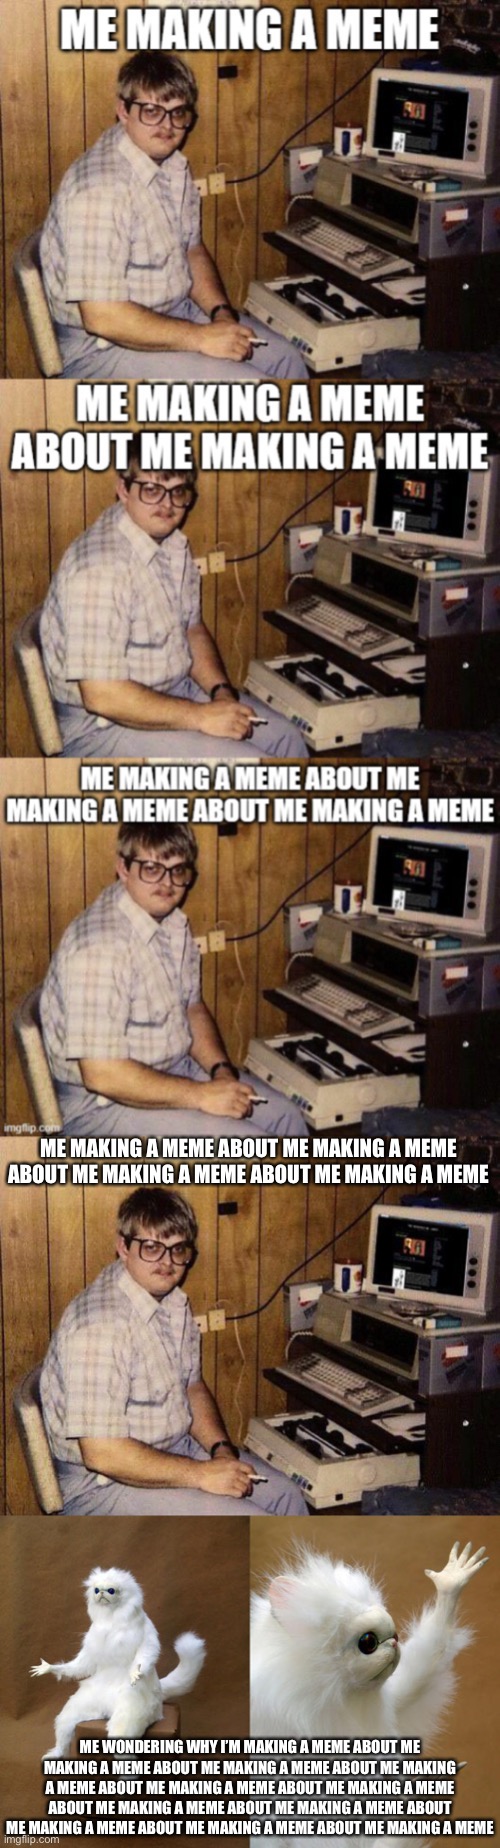  ME MAKING A MEME ABOUT ME MAKING A MEME ABOUT ME MAKING A MEME ABOUT ME MAKING A MEME; ME WONDERING WHY I’M MAKING A MEME ABOUT ME MAKING A MEME ABOUT ME MAKING A MEME ABOUT ME MAKING A MEME ABOUT ME MAKING A MEME ABOUT ME MAKING A MEME ABOUT ME MAKING A MEME ABOUT ME MAKING A MEME ABOUT ME MAKING A MEME ABOUT ME MAKING A MEME ABOUT ME MAKING A MEME | image tagged in computer nerd,memes,persian cat room guardian | made w/ Imgflip meme maker